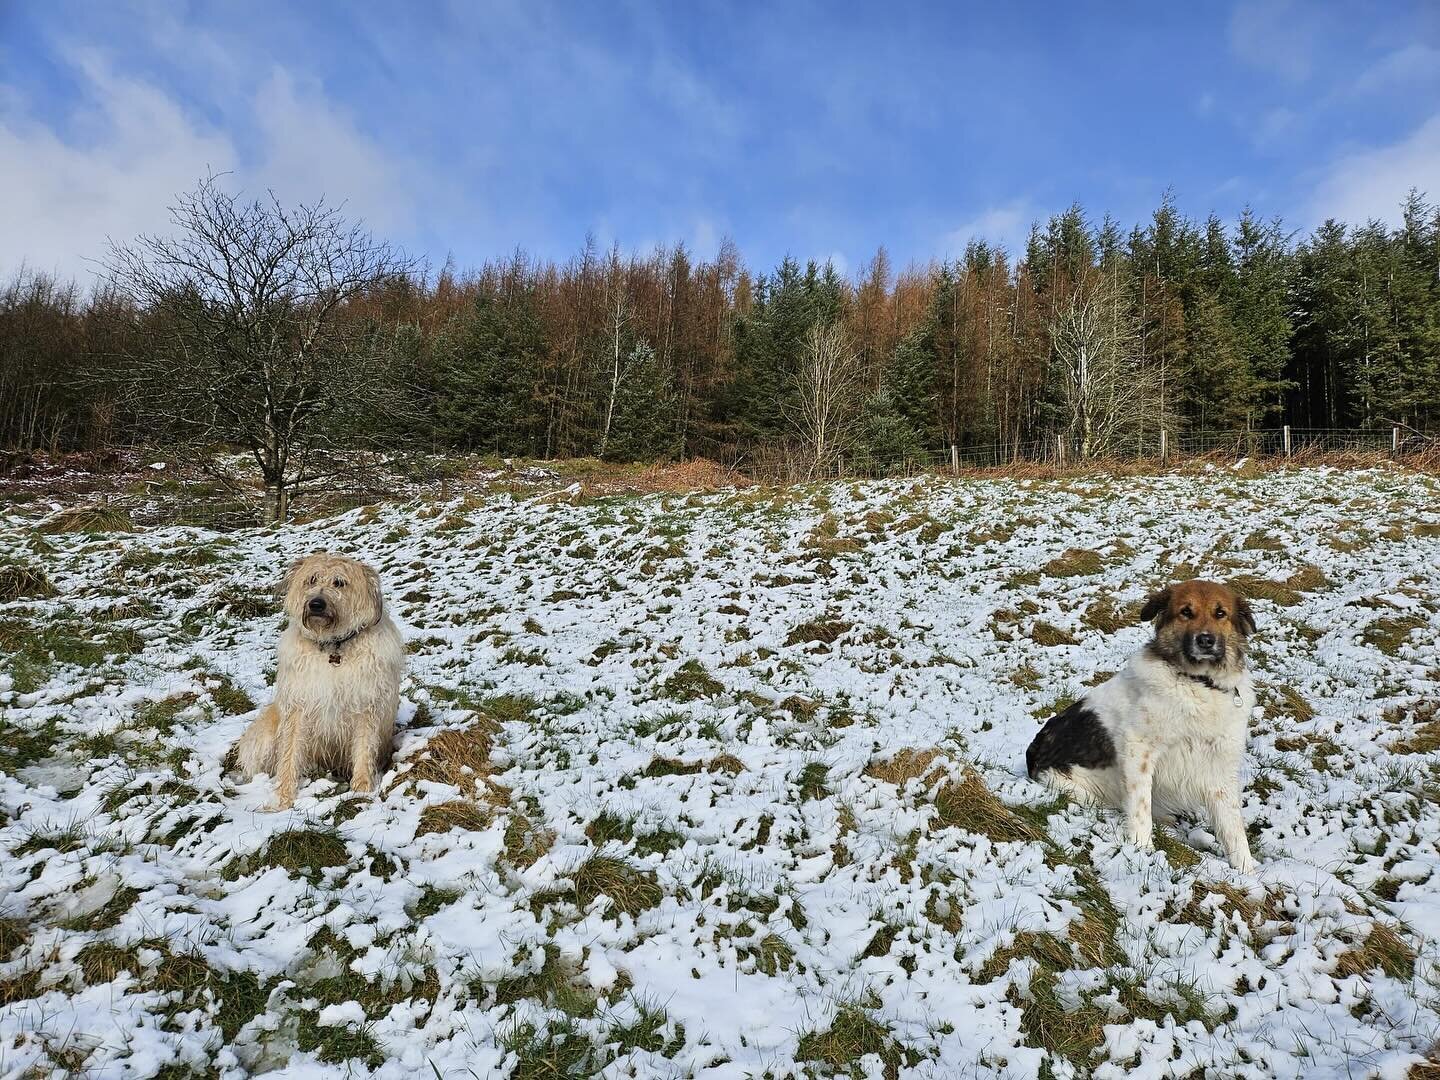 Teddy and Lexi made the most of our snow showers today. 

#dogsloveholidays #reactivedogholidays #dogfriendlycottagewales #reactivedogs #reactivedogsuk #reactivedogsaregooddogs #romanianrescues